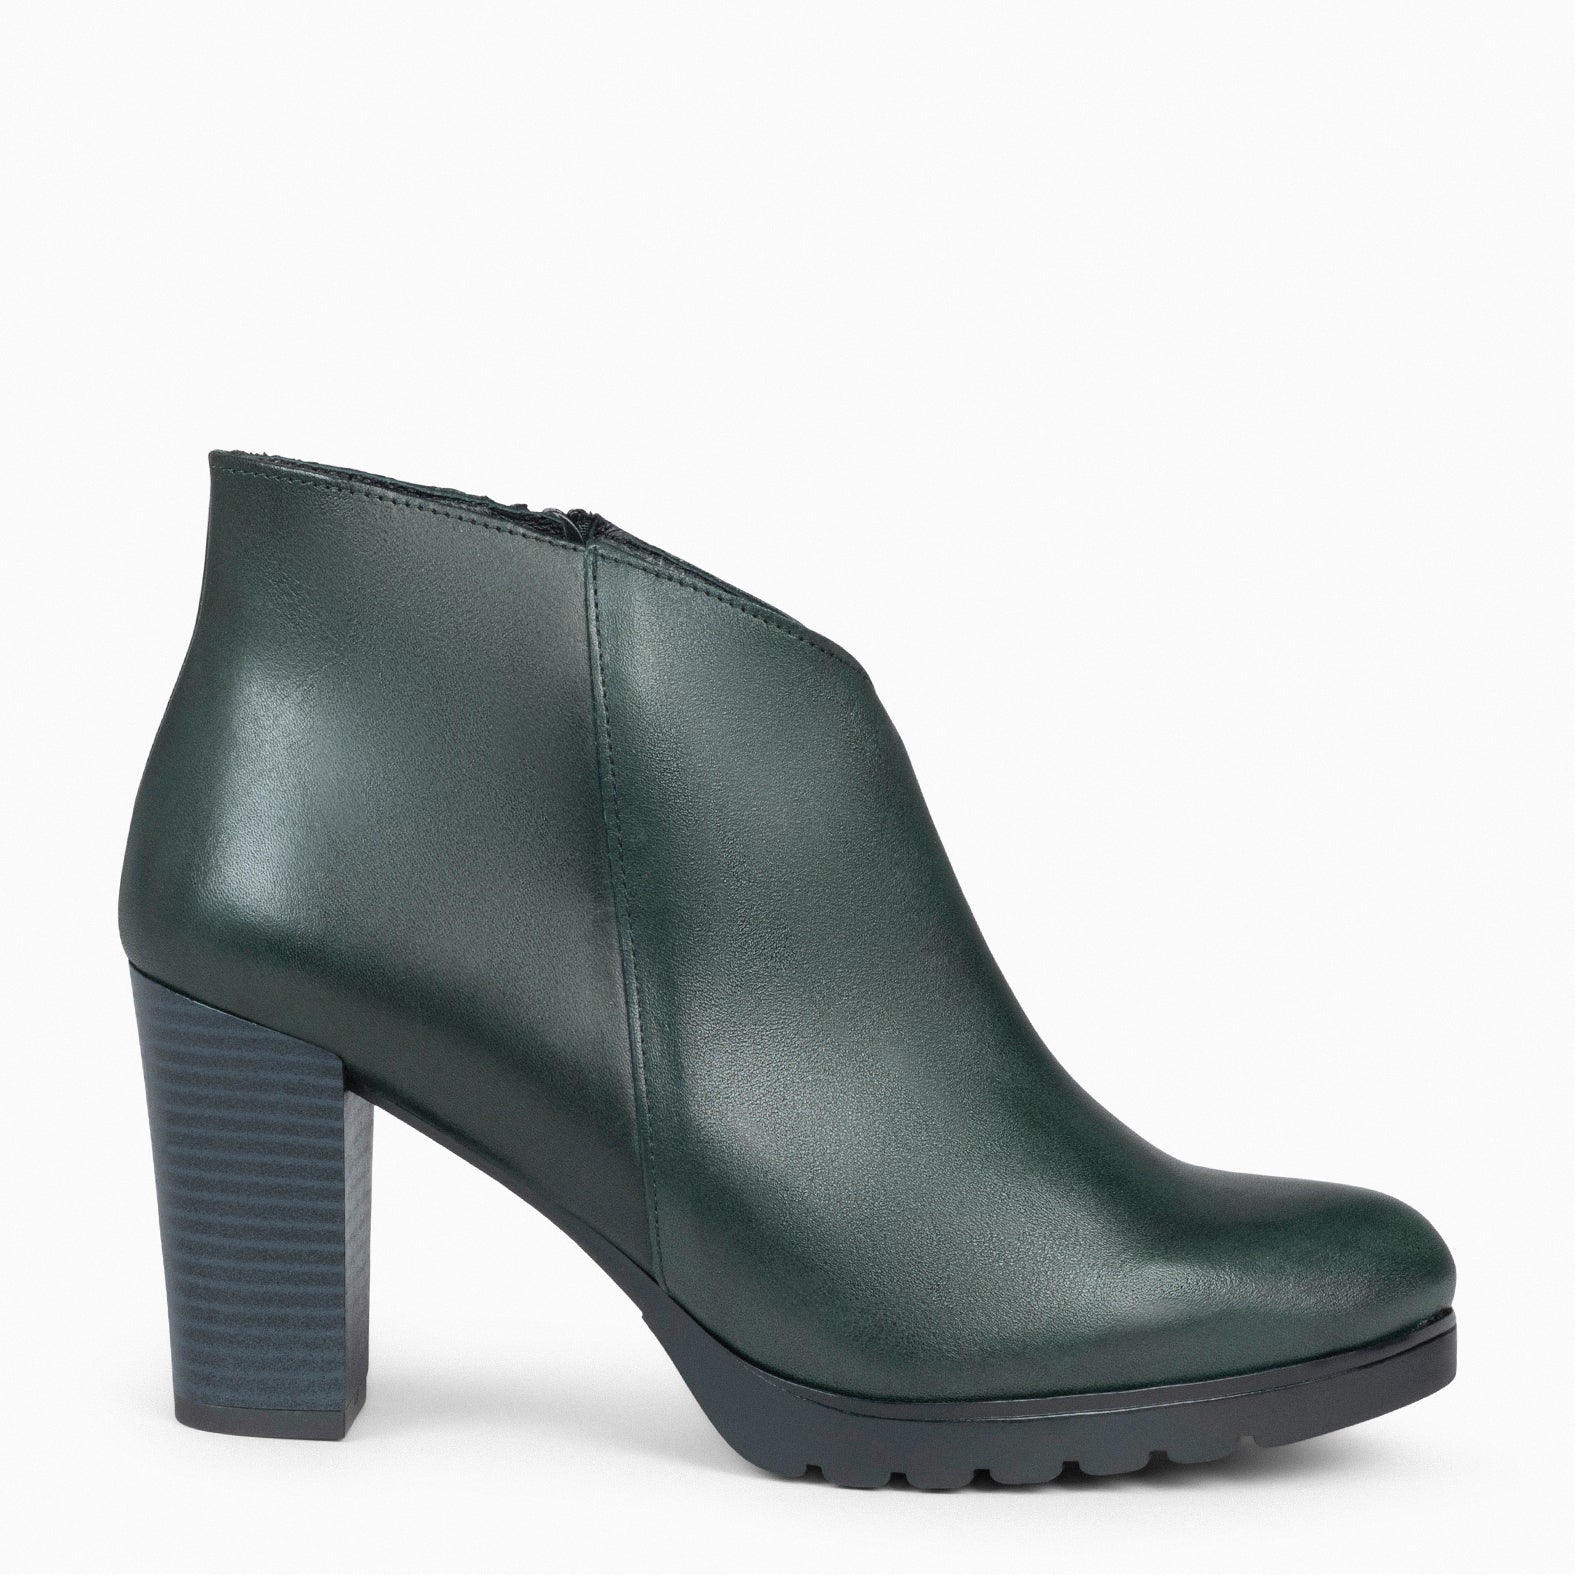 CLASSIC - GREEN Women's Ankle Boots with heel